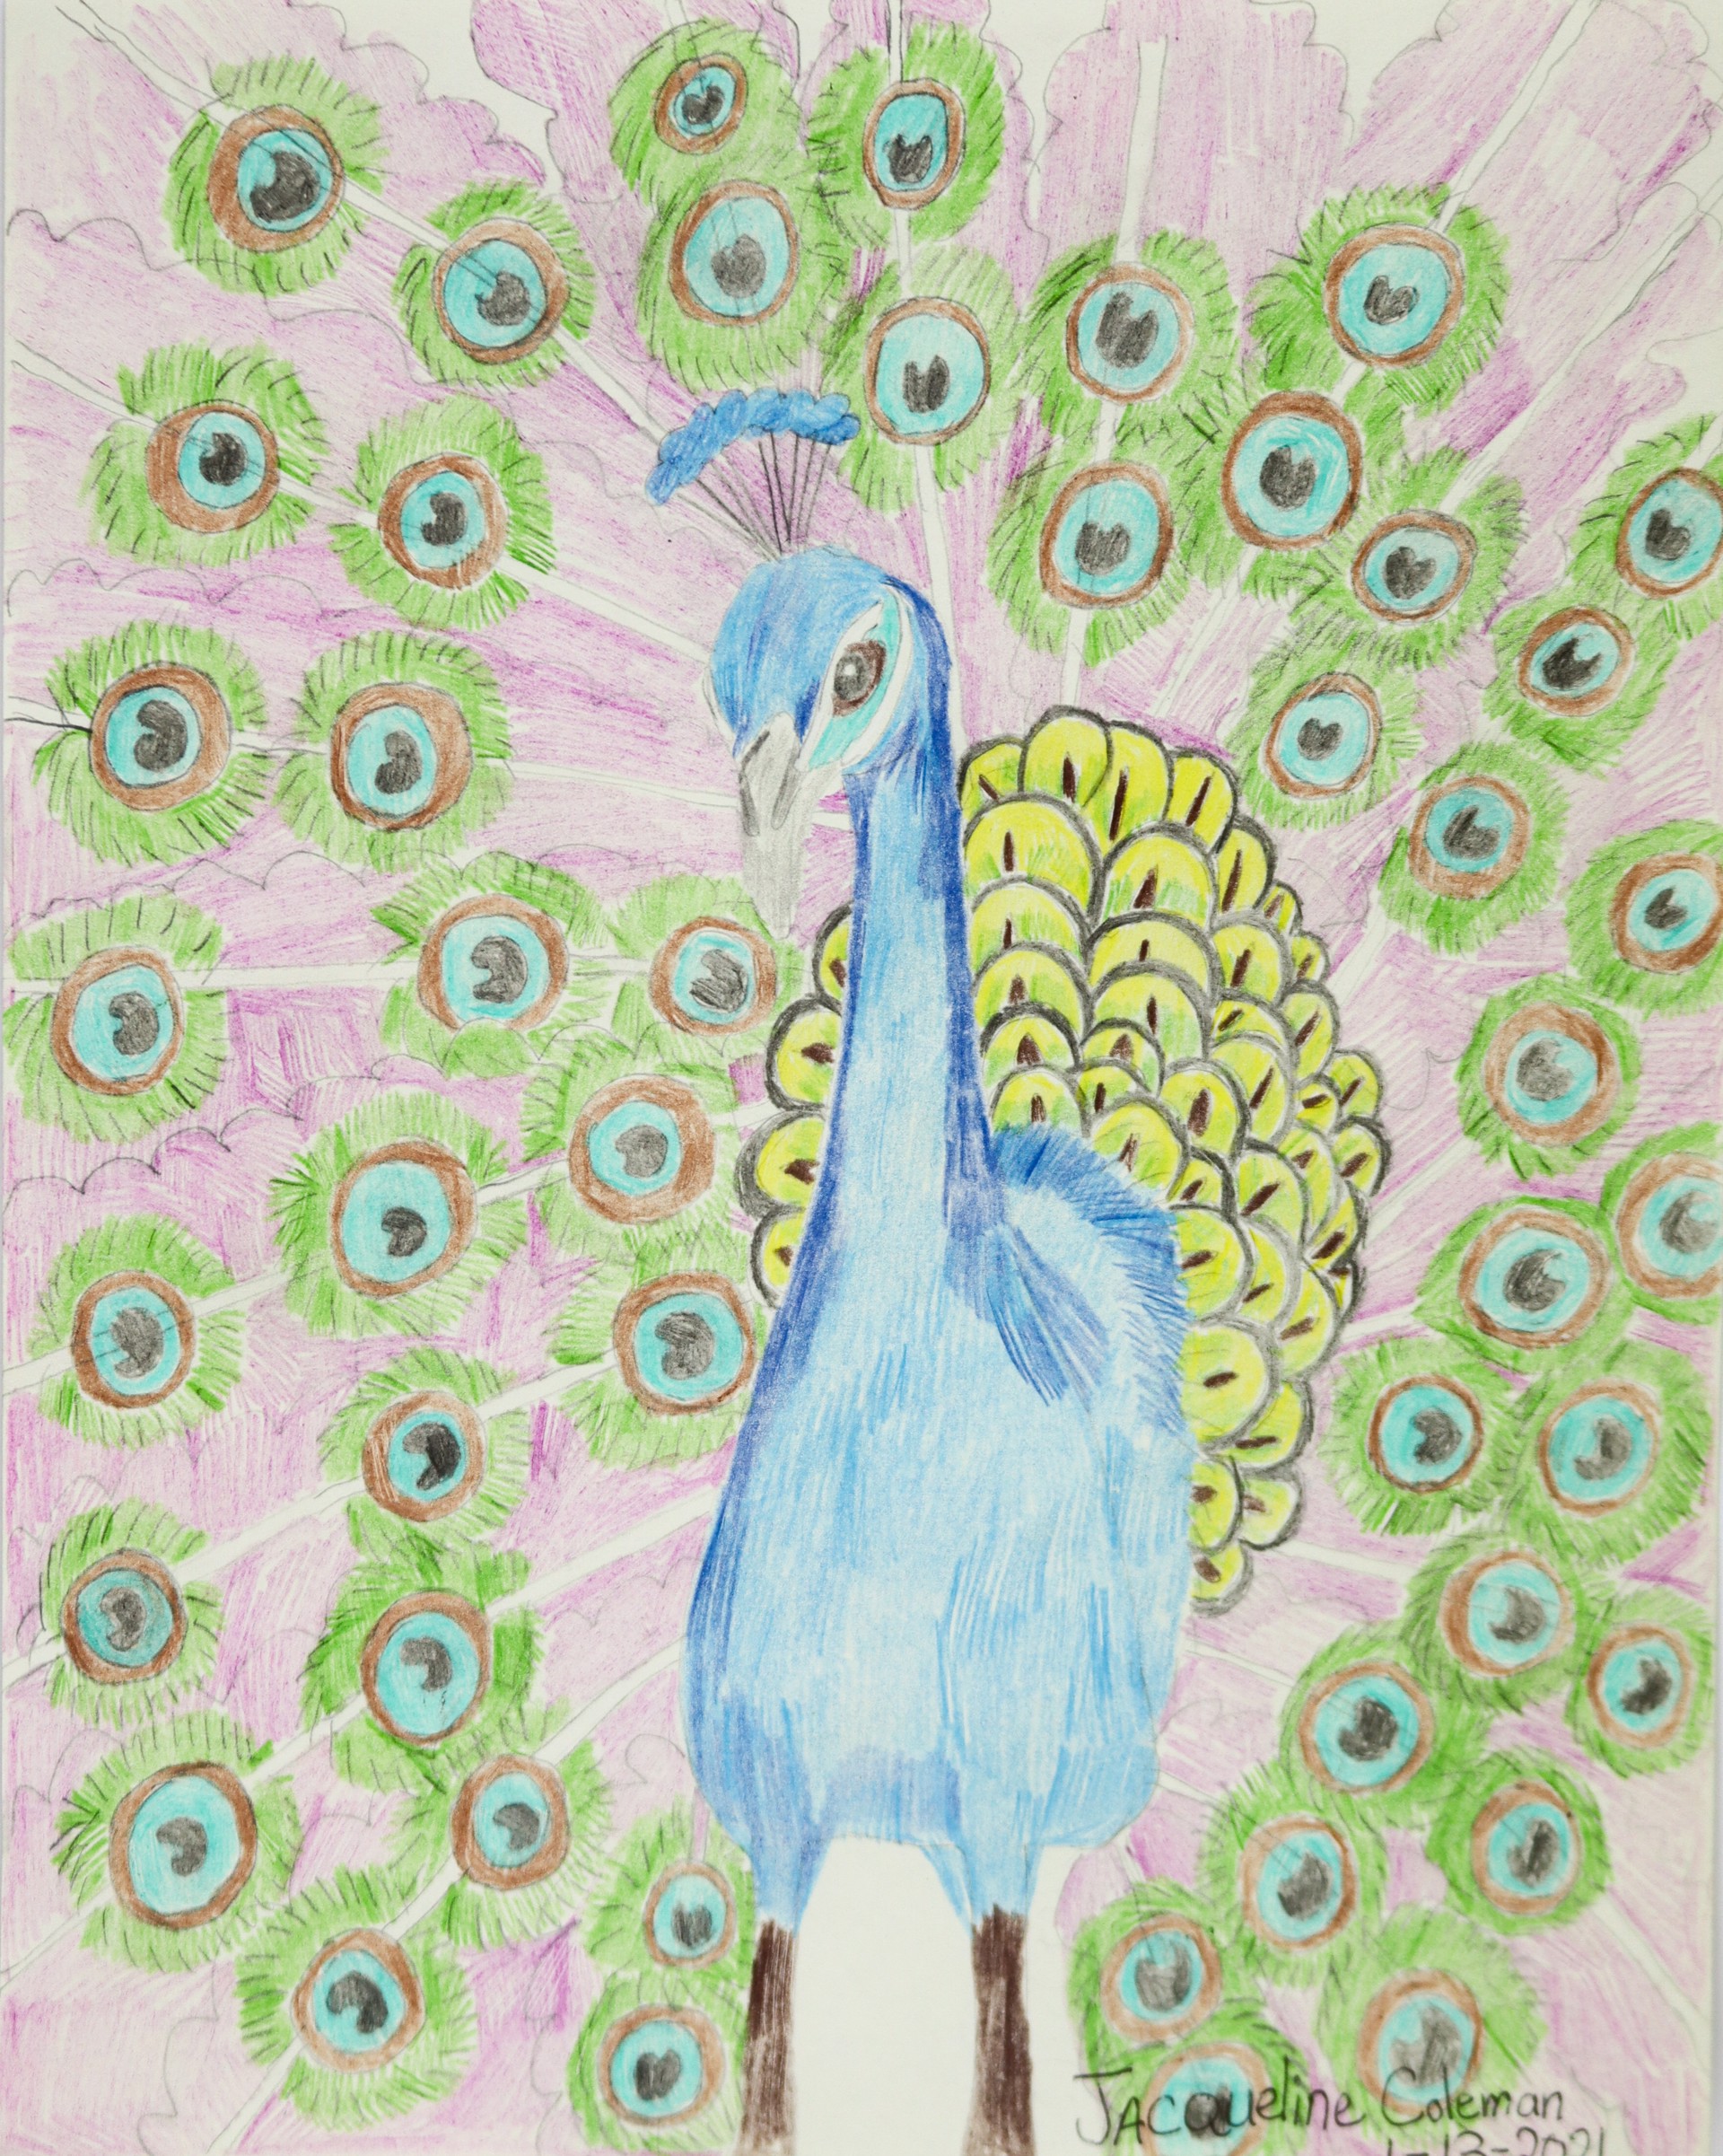 Peacock by Jacqueline Coleman